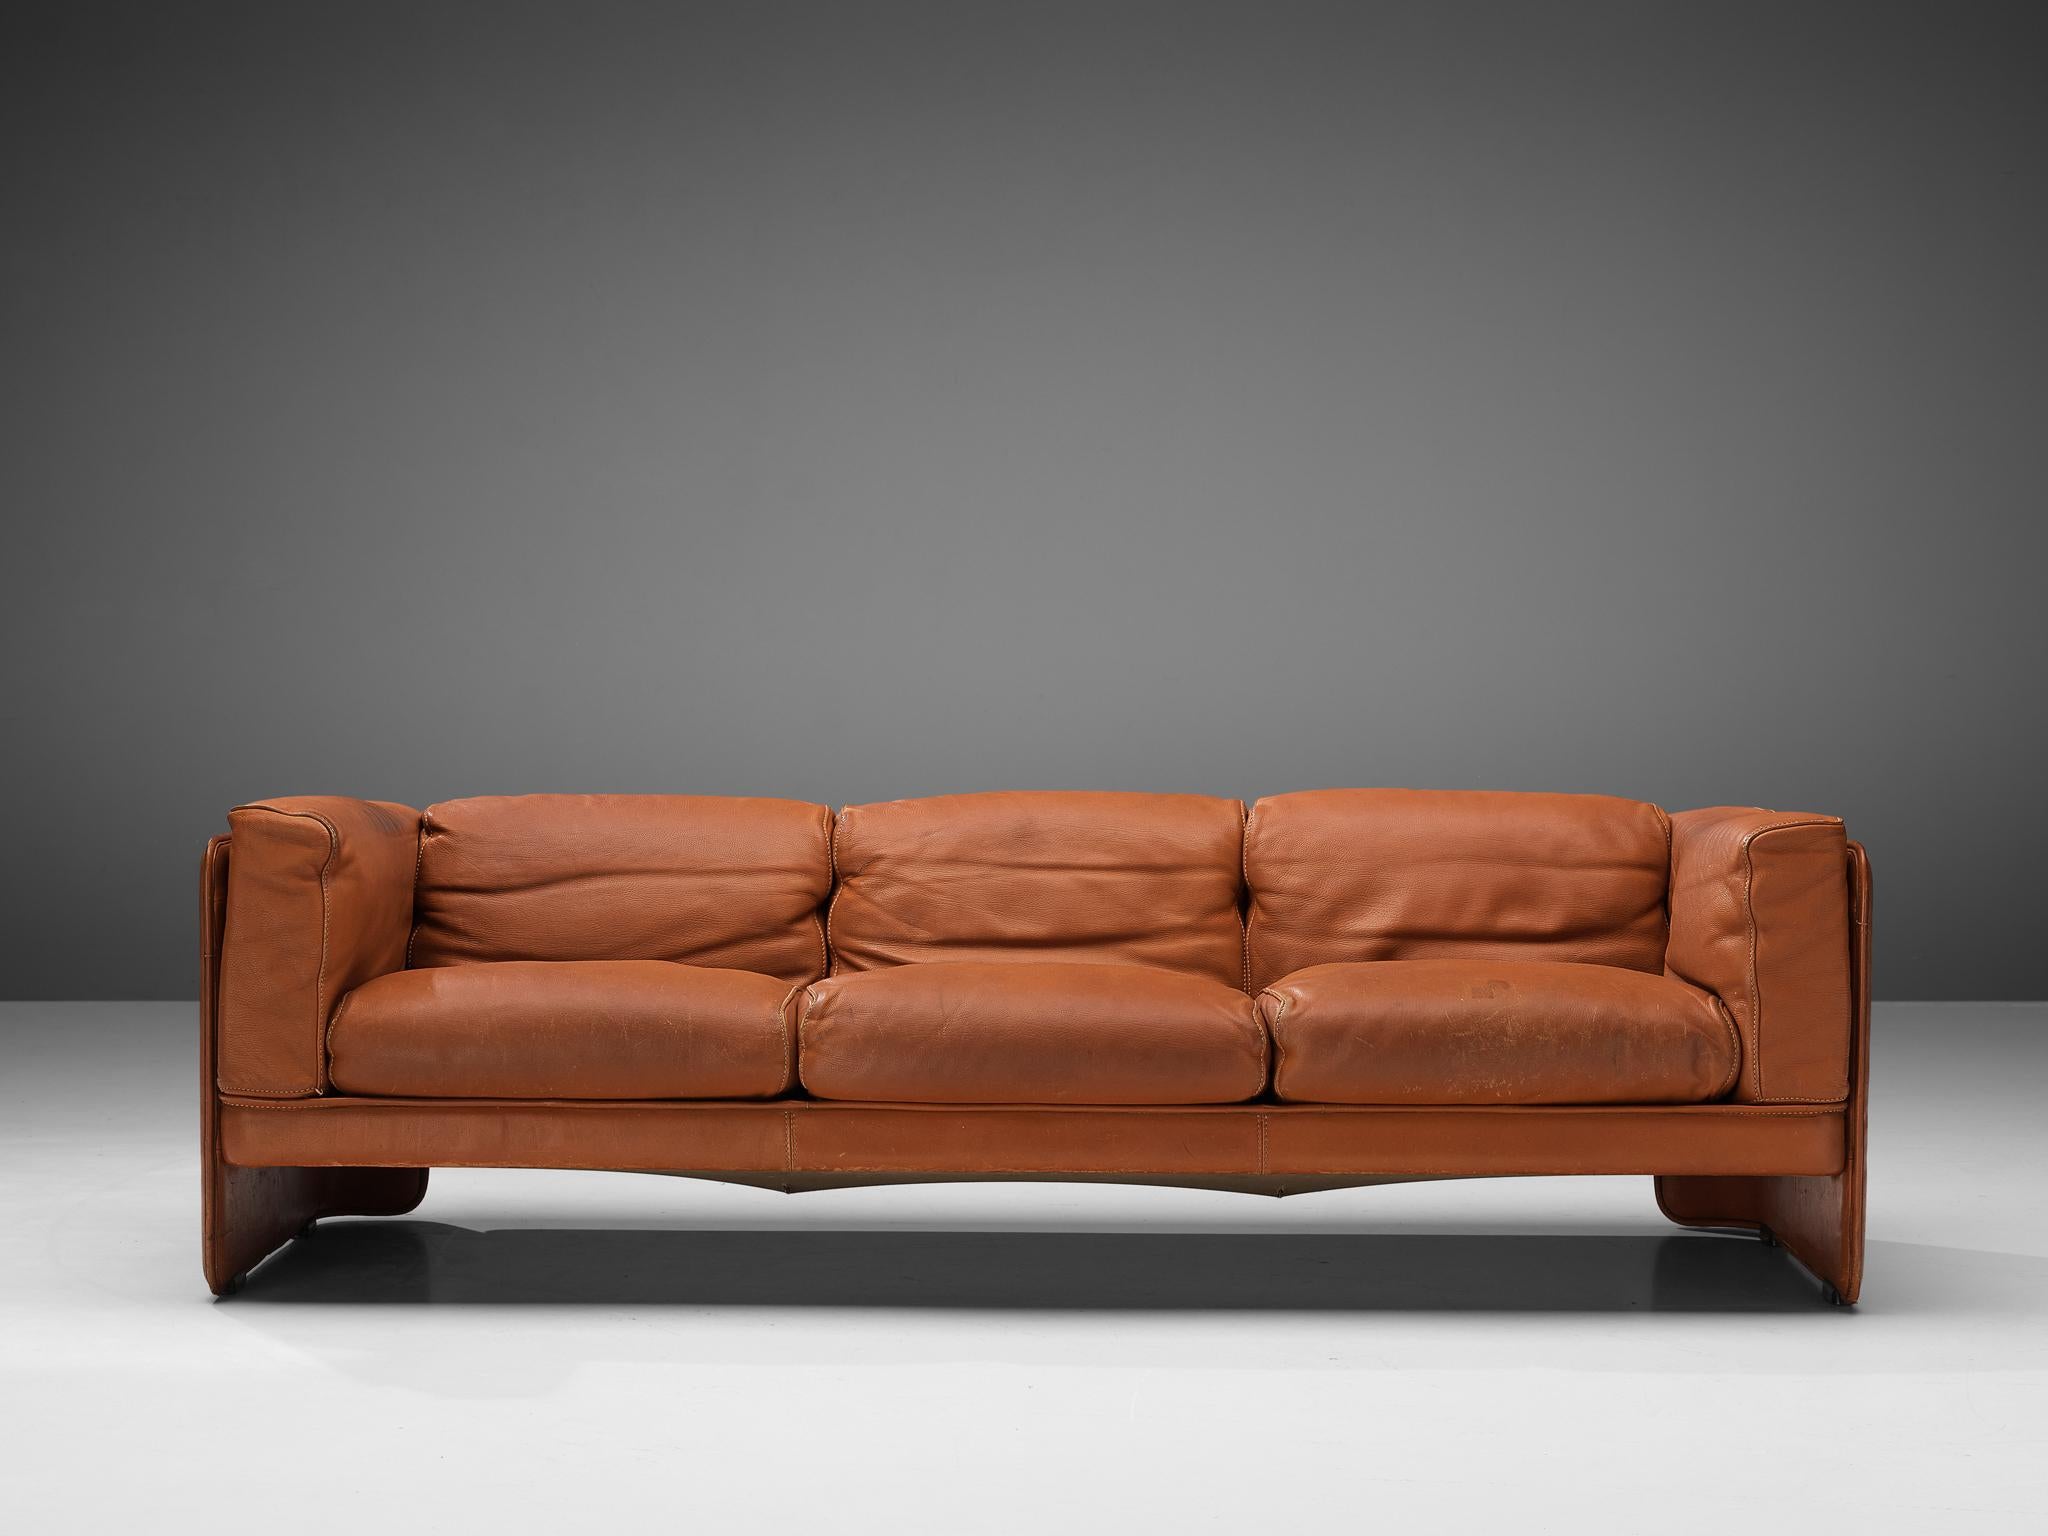 Poltrona Frau, sofa, leather, Italy, 1970s

This striking three-seat sofa is manufactured by Poltrona Frau and fully executed in reddish brown leather that contributes to a monochrome look. The frame holds the seat together and simultaneously